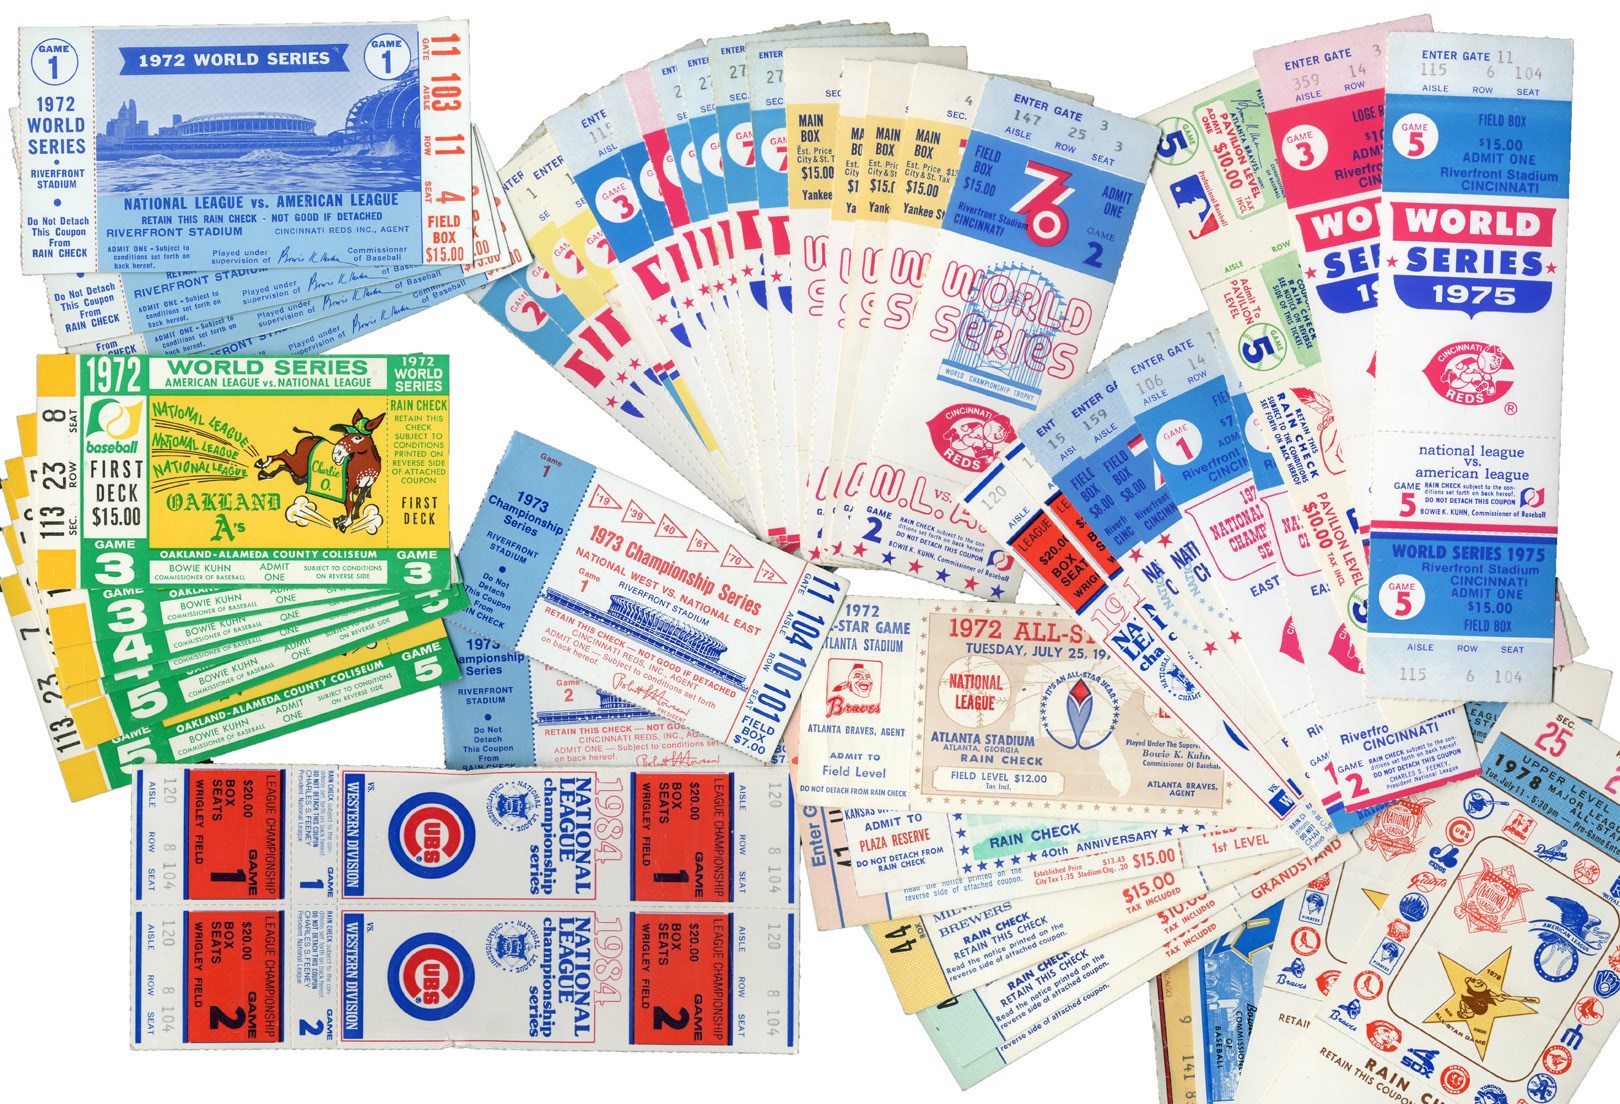 Tickets, Publications & Pins - 1969-80s World Series, All-Star Game and LCS Ticket Collection (55)